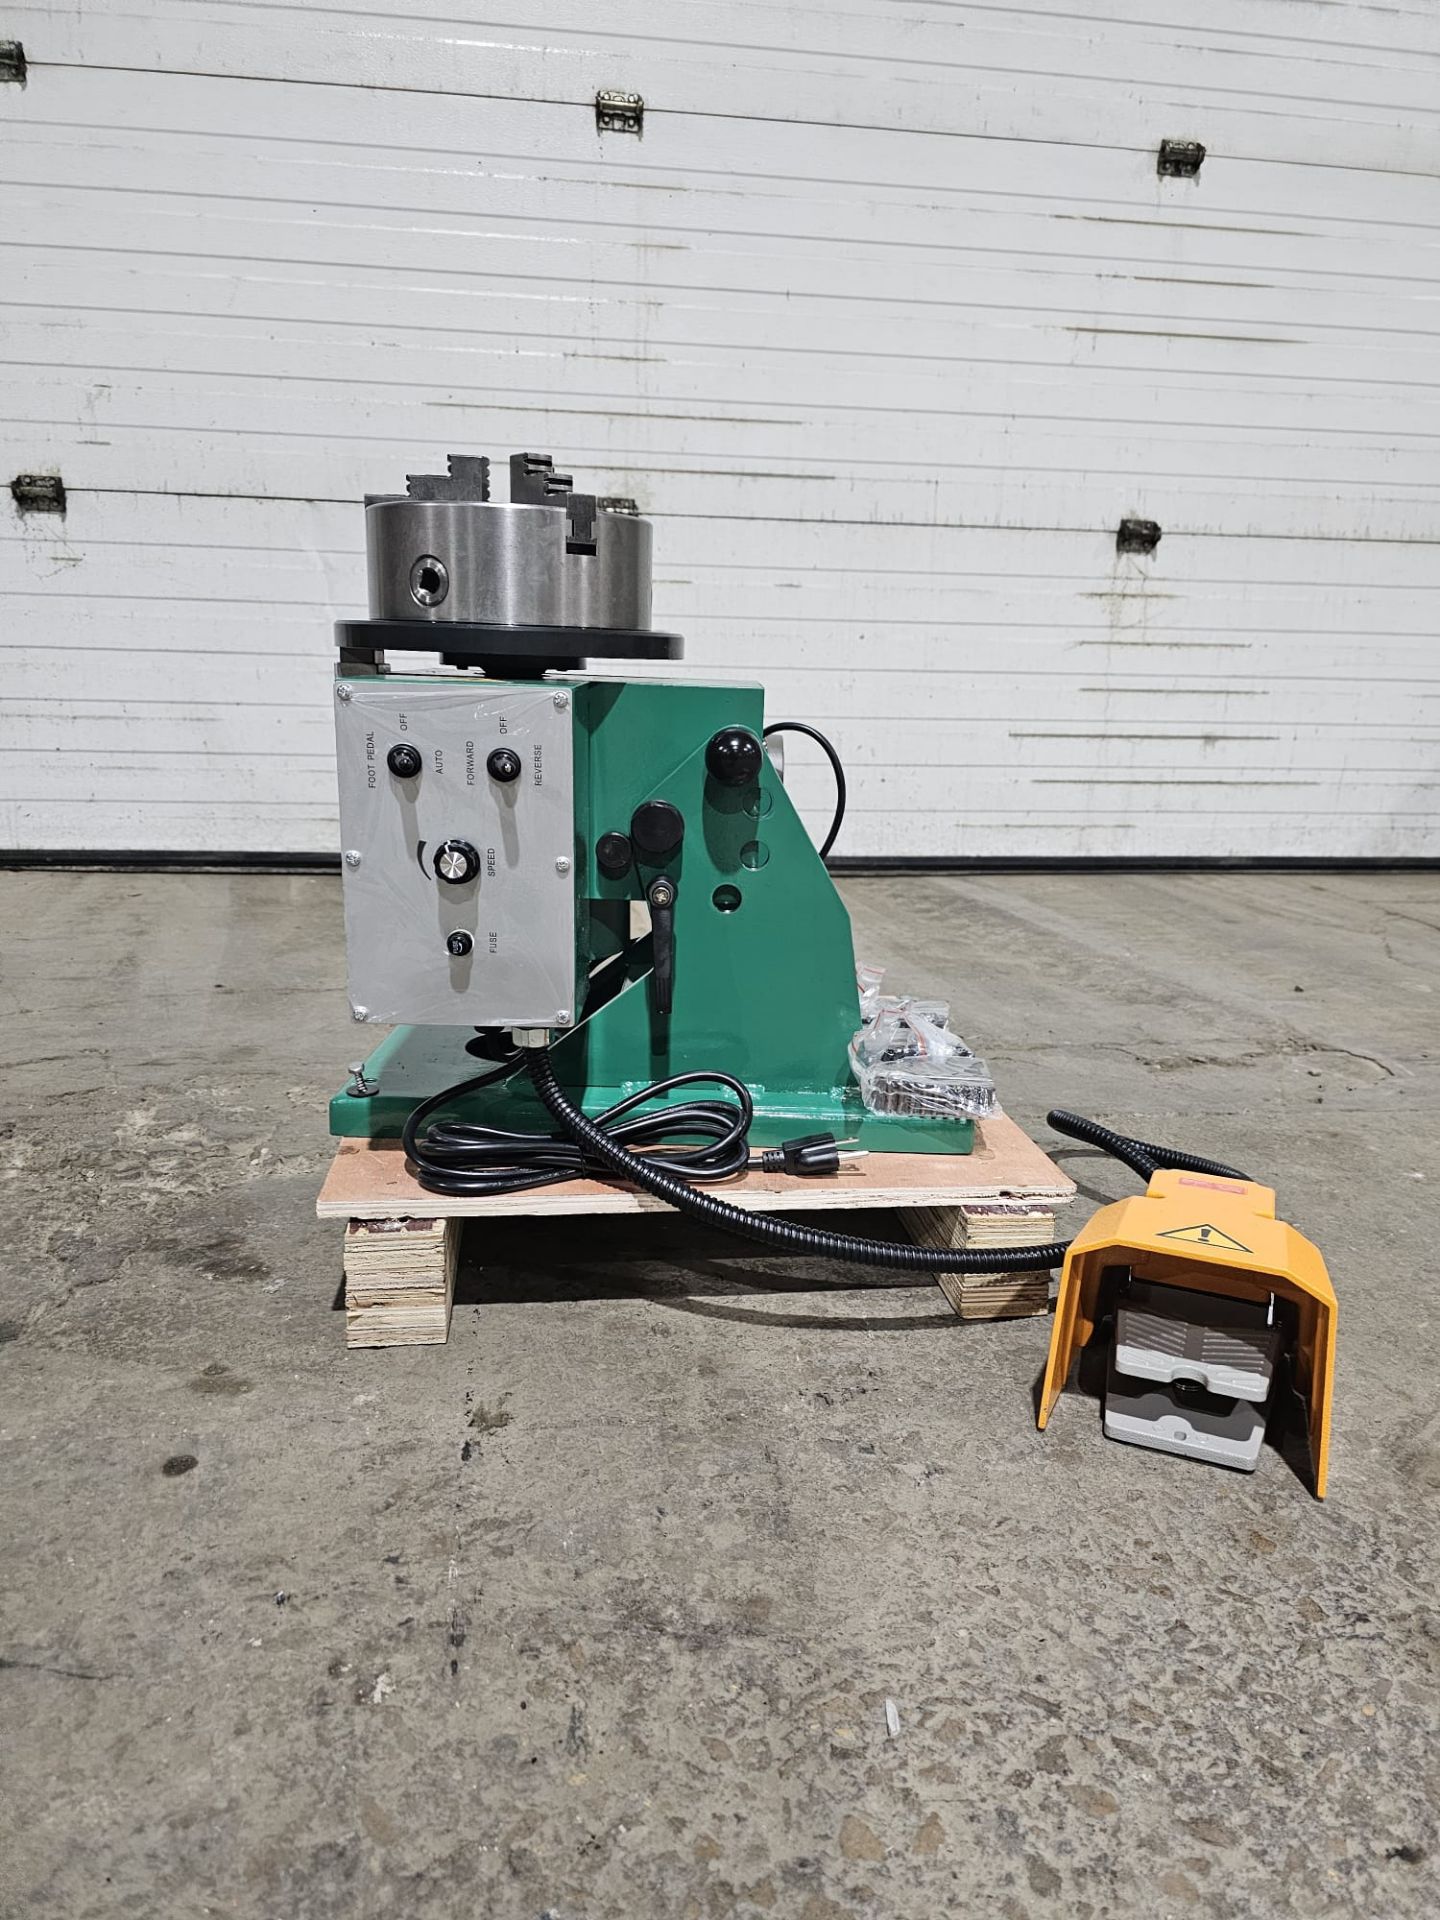 Verner model VP-110 WELDING POSITIONER 250lbs Capacity with 3-Jaw Chuck - tilt and rotate with - Image 4 of 8